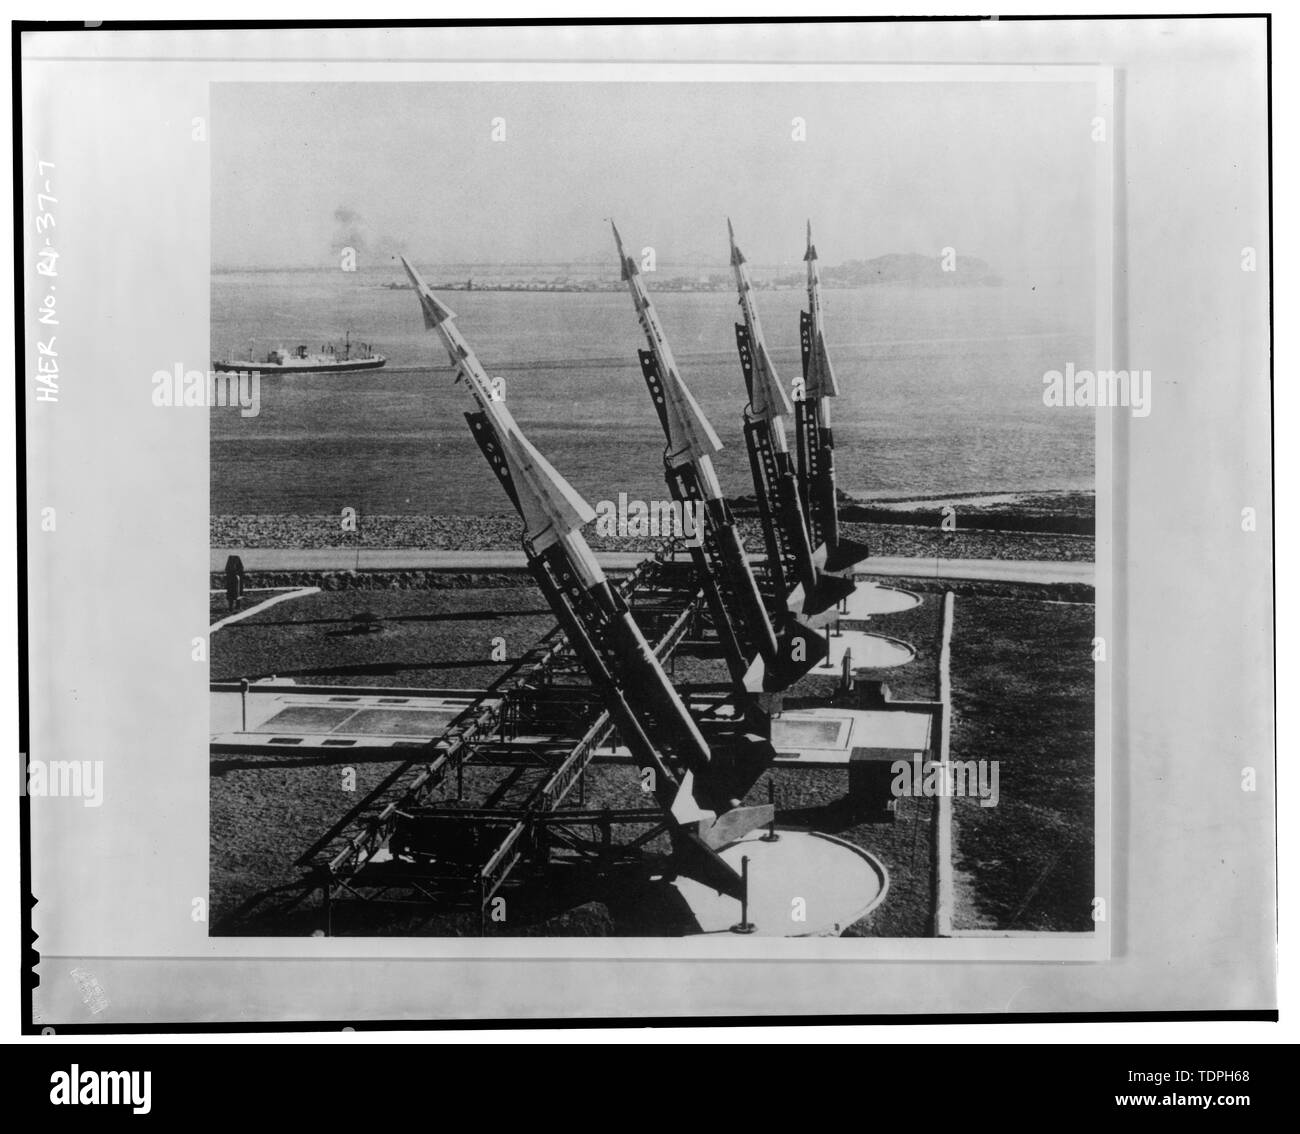 showing four Ajax missiles in launch position from ARADCOM Argus pg. 14,  from Institute for Military History, Carlisle Barracks, Carlisle, PA,  October 1, 1963 - NIKE Missile Battery PR-79, East Windsor Road